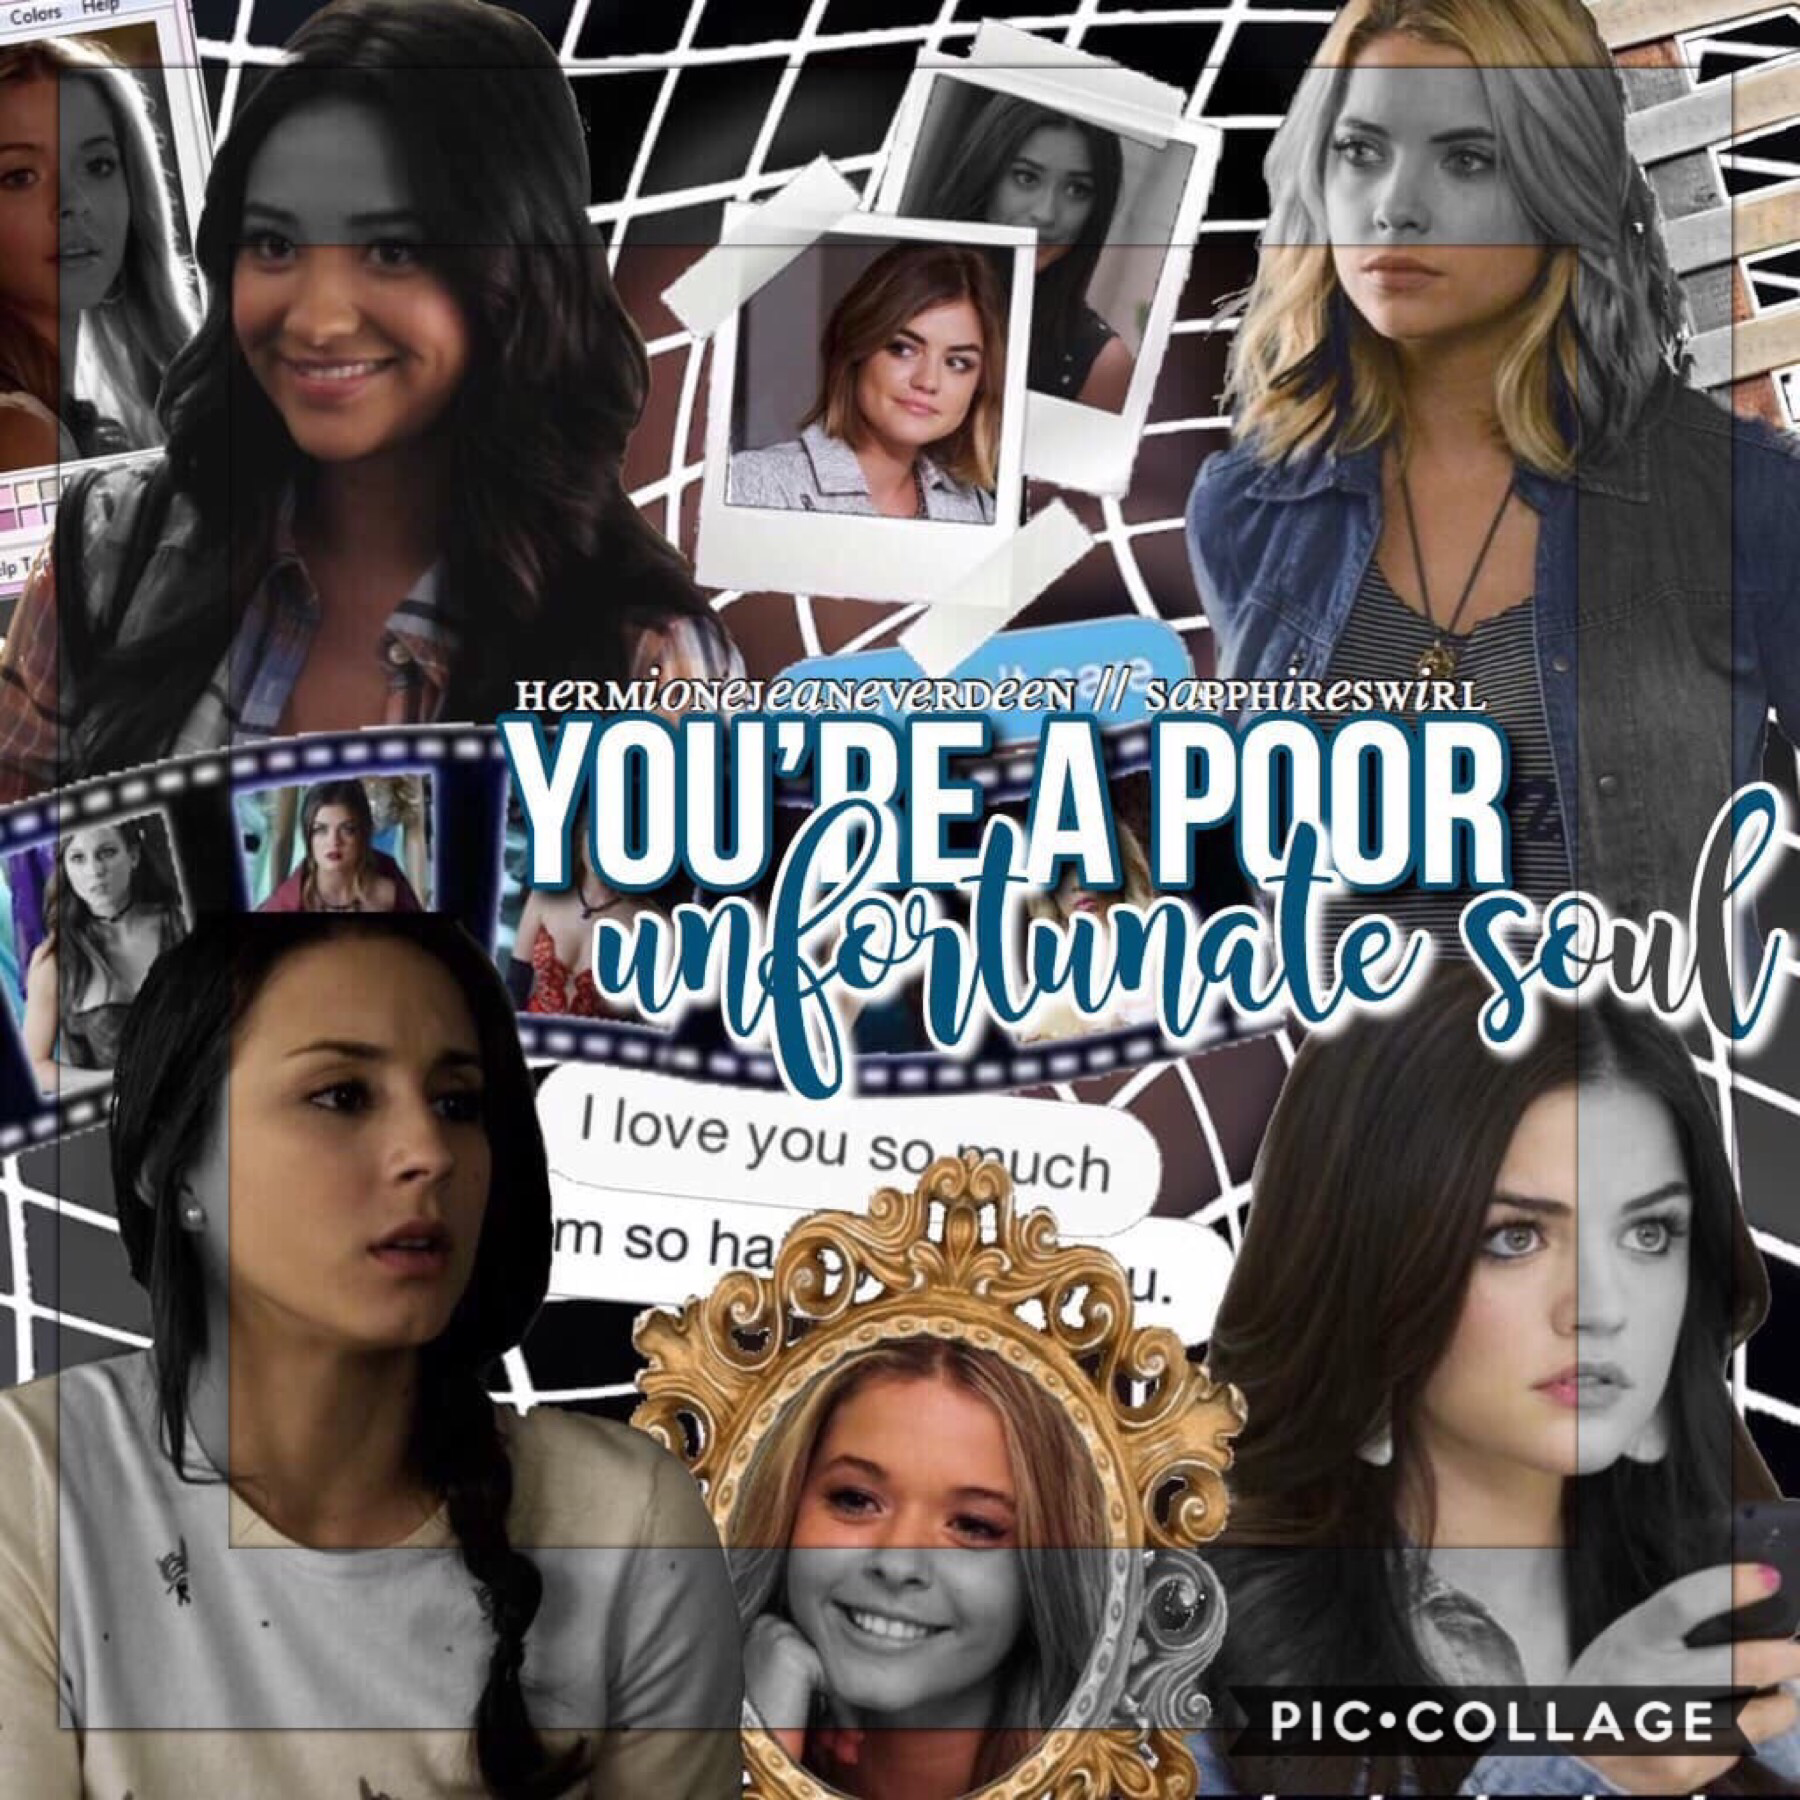 tap 
collab with one of my best friends @SapphireSwirl if you aren’t following her, follow her now. 
QOTD: Favorite PLL character?
A: Spencer but I love the main 5💞